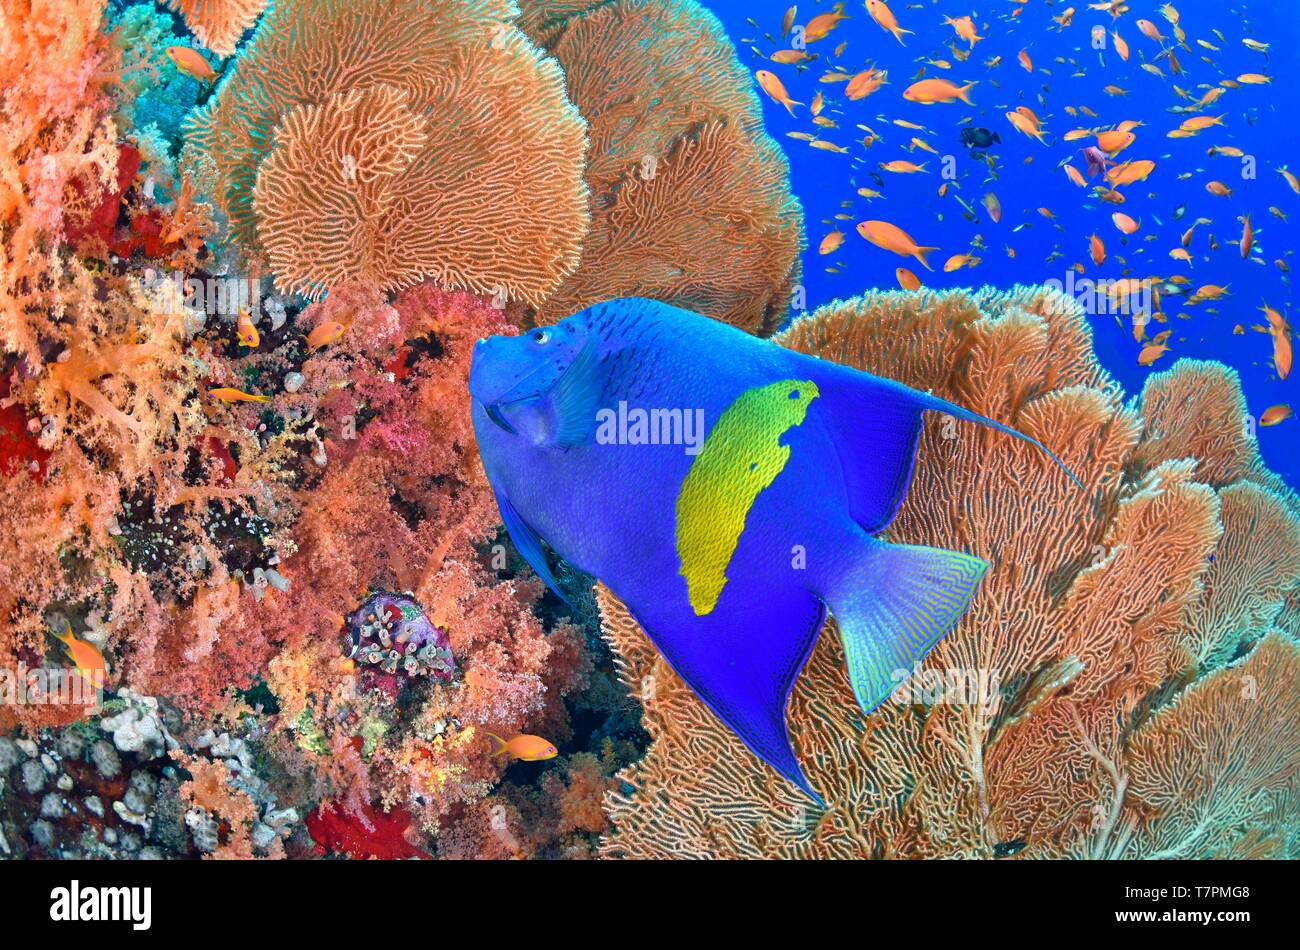 Egypt, Red Sea, a coral reef with an yellowbar angelfish (Pomacanthus maculosus) Stock Photo